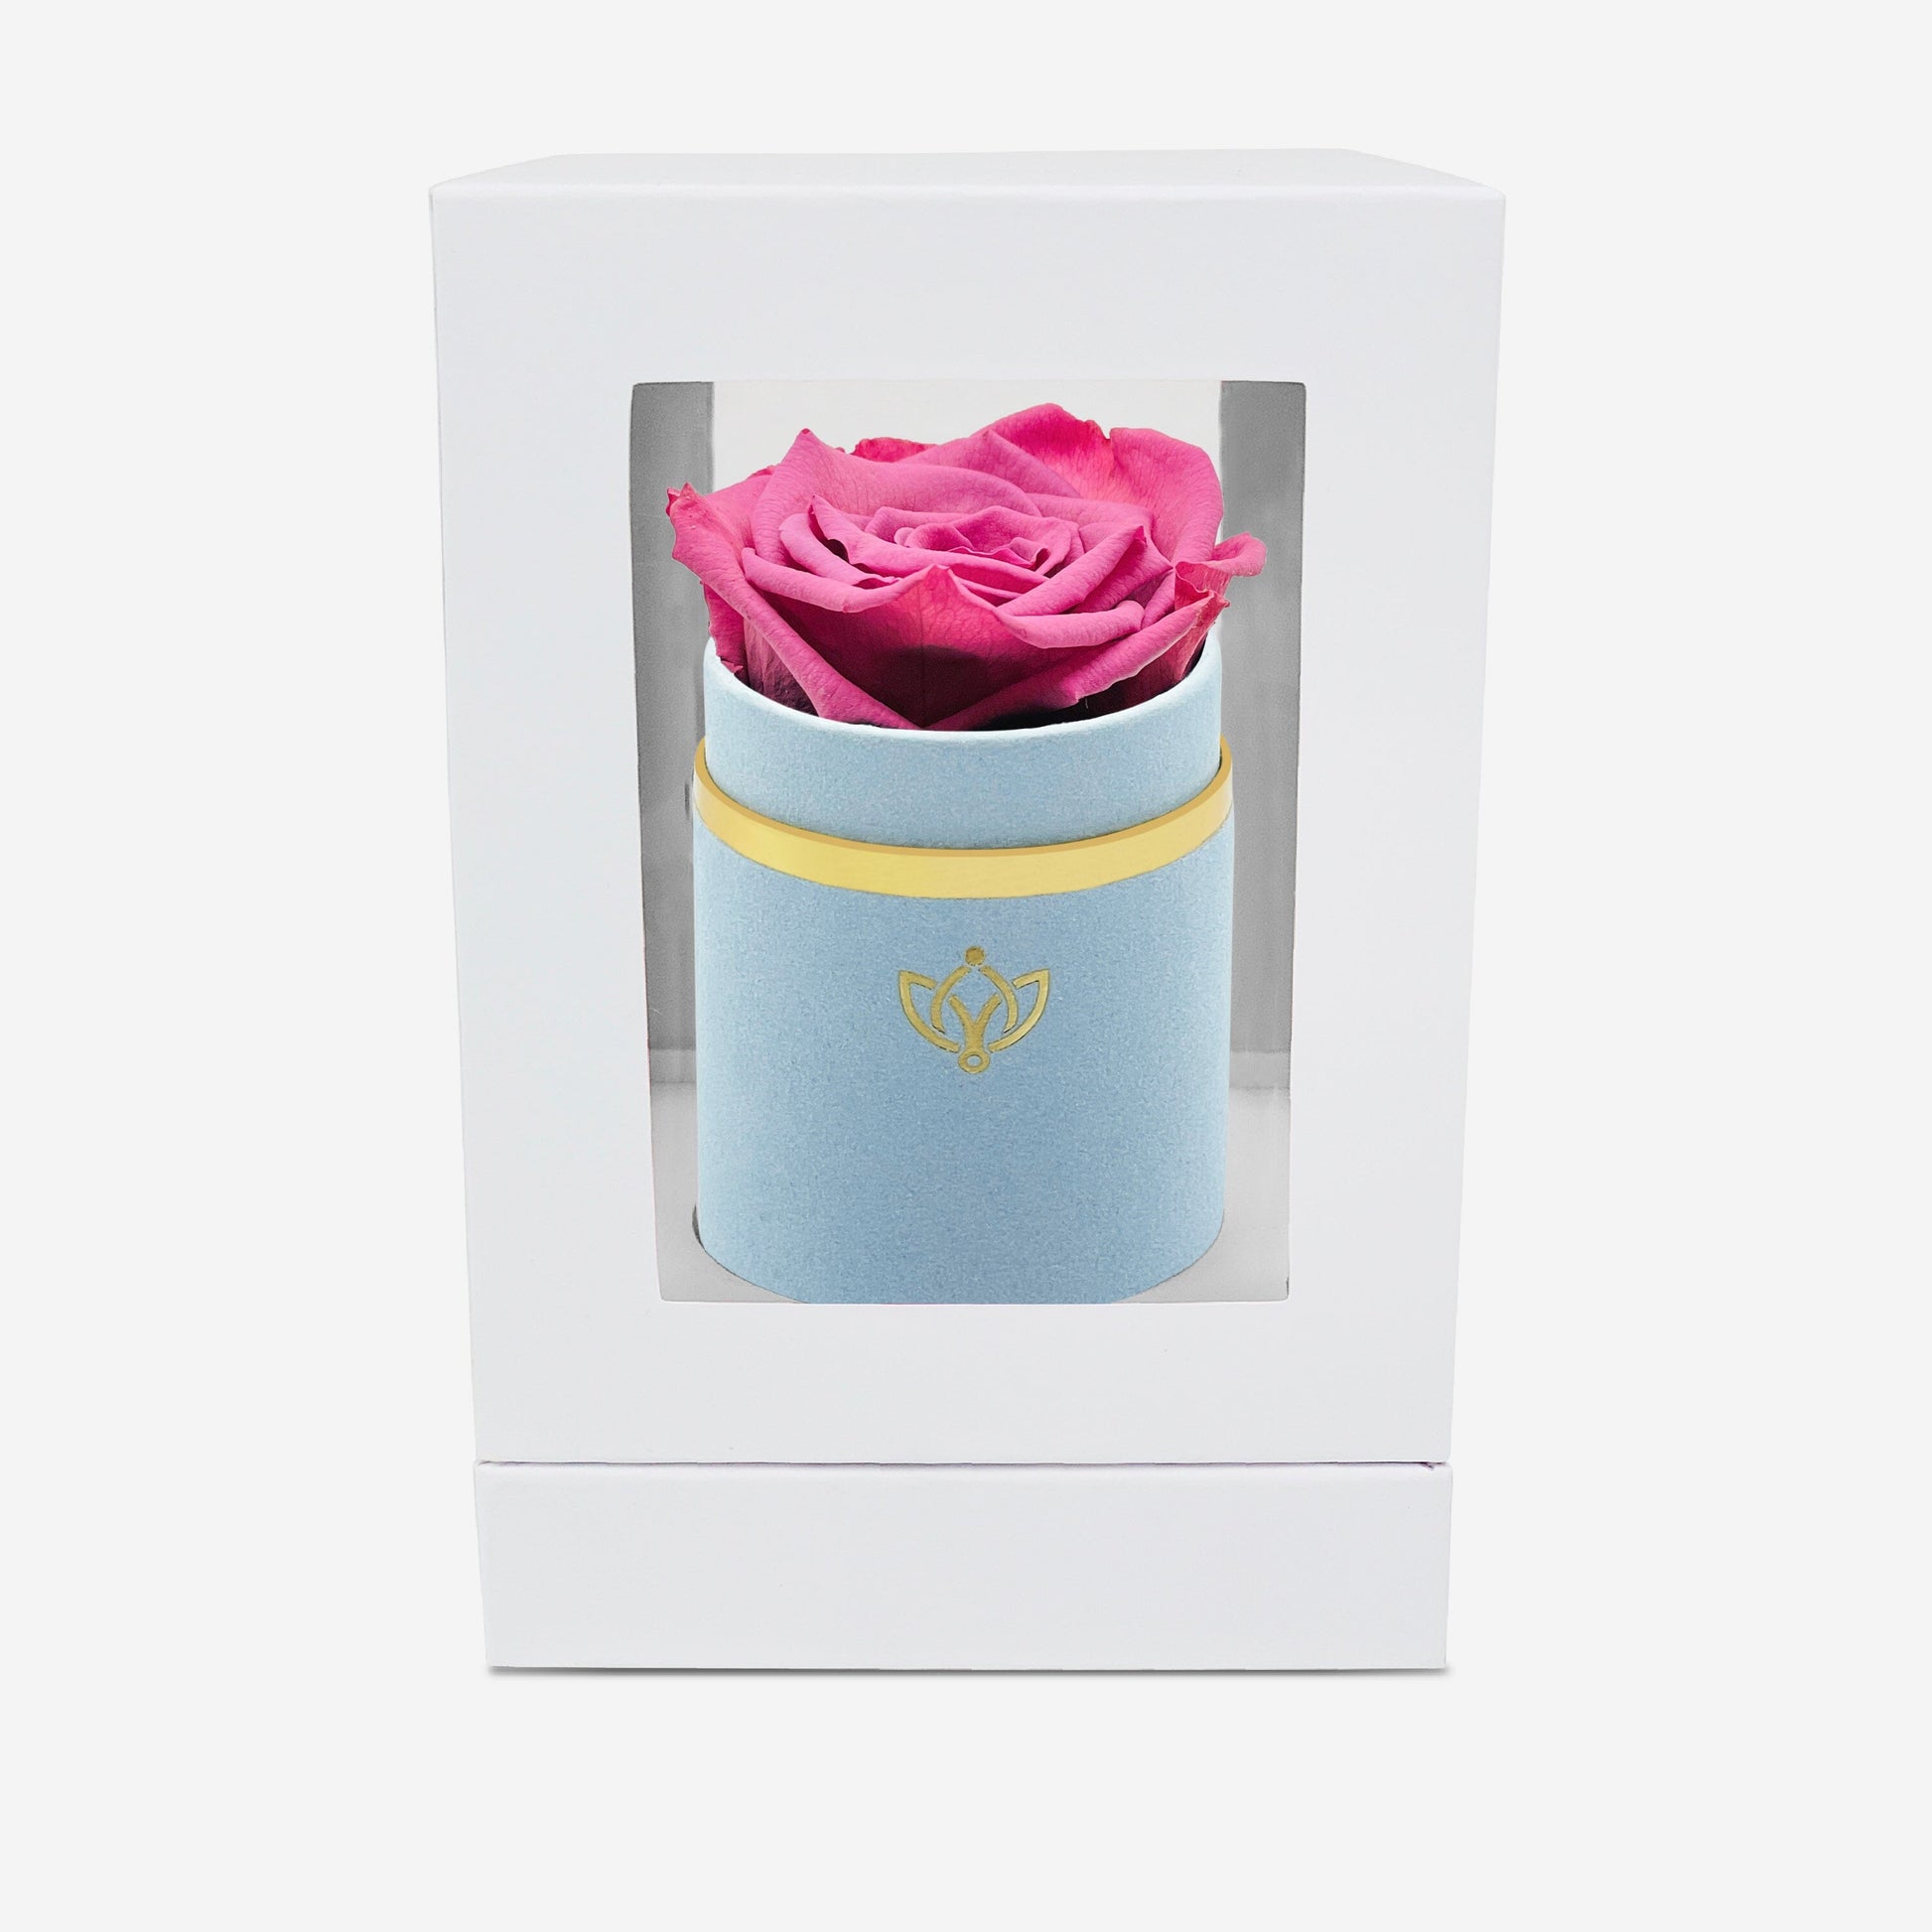 Single Light Blue Suede Box | Orchid Rose - The Million Roses